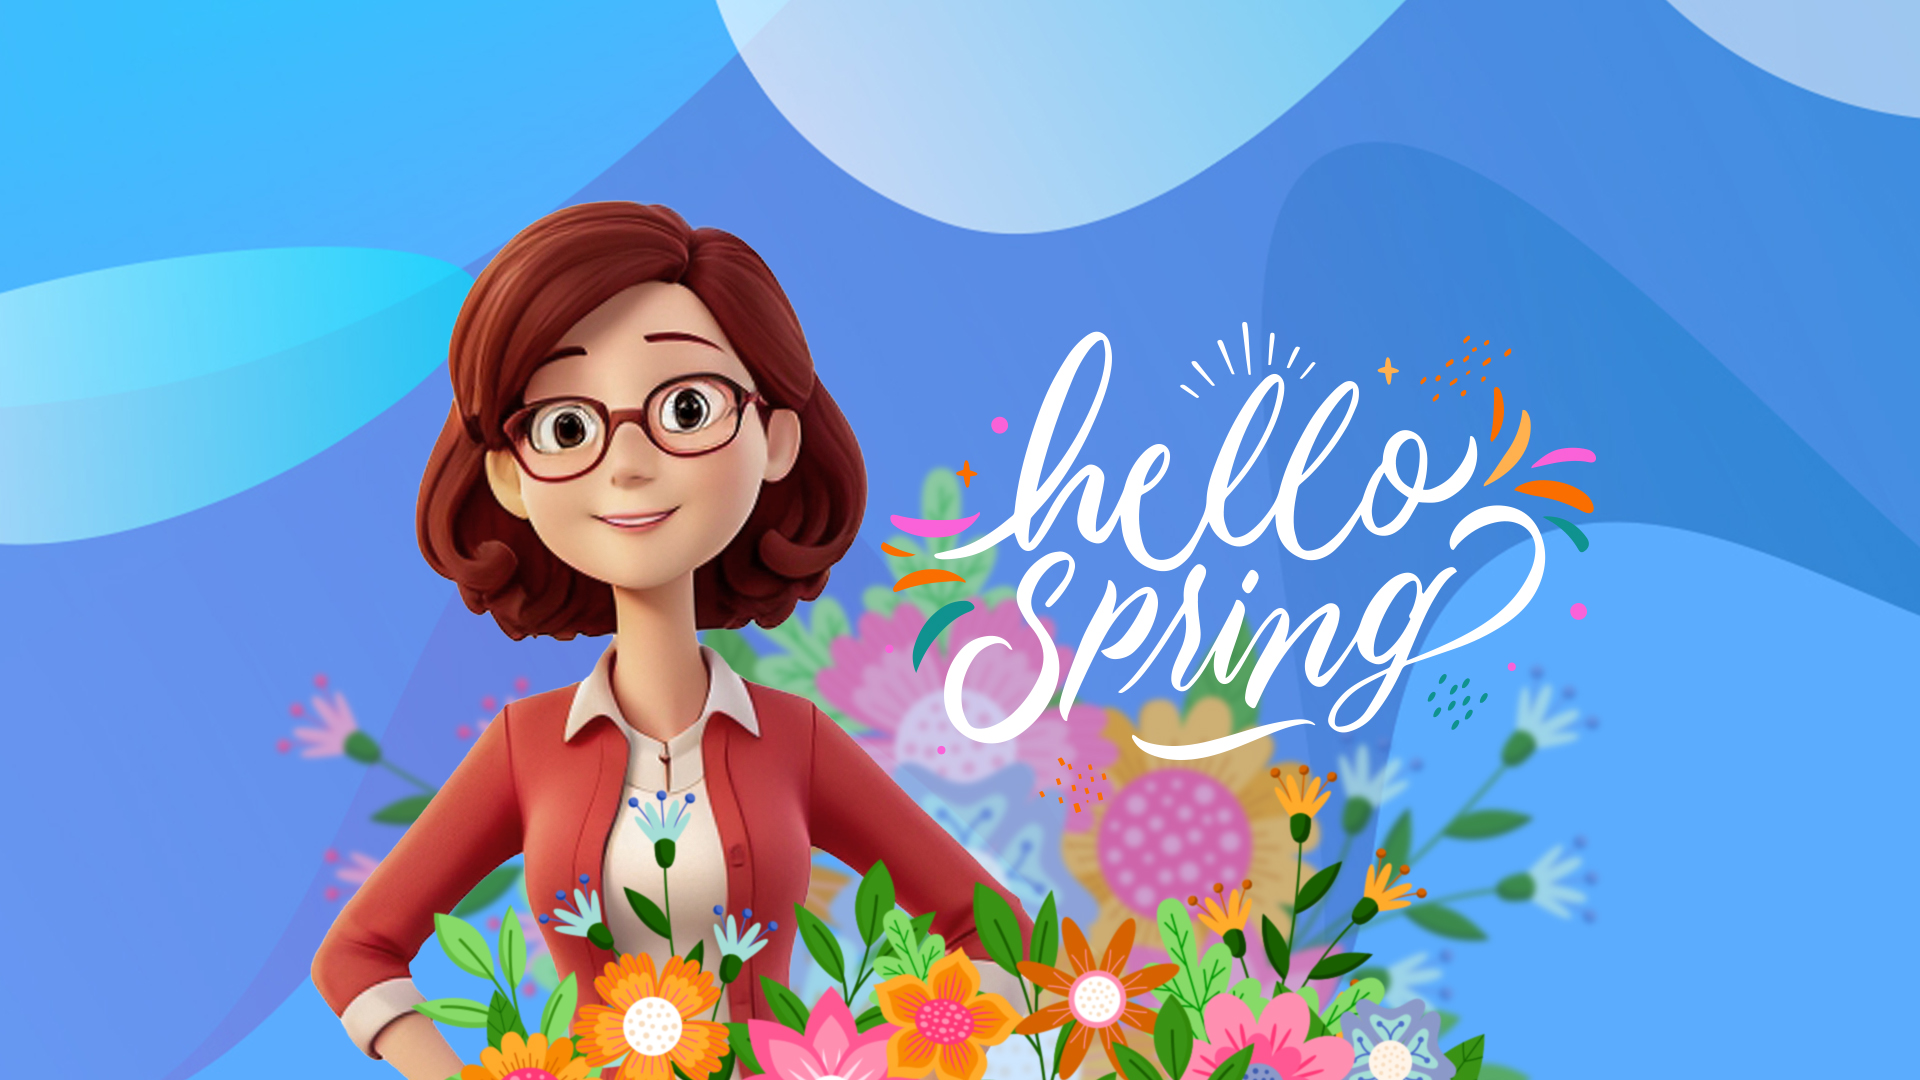 A 3D-animated woman is seen from the waist up, standing behind a range of colorful illustrated flowers of all varieties. The words 'hello spring' are to her right.